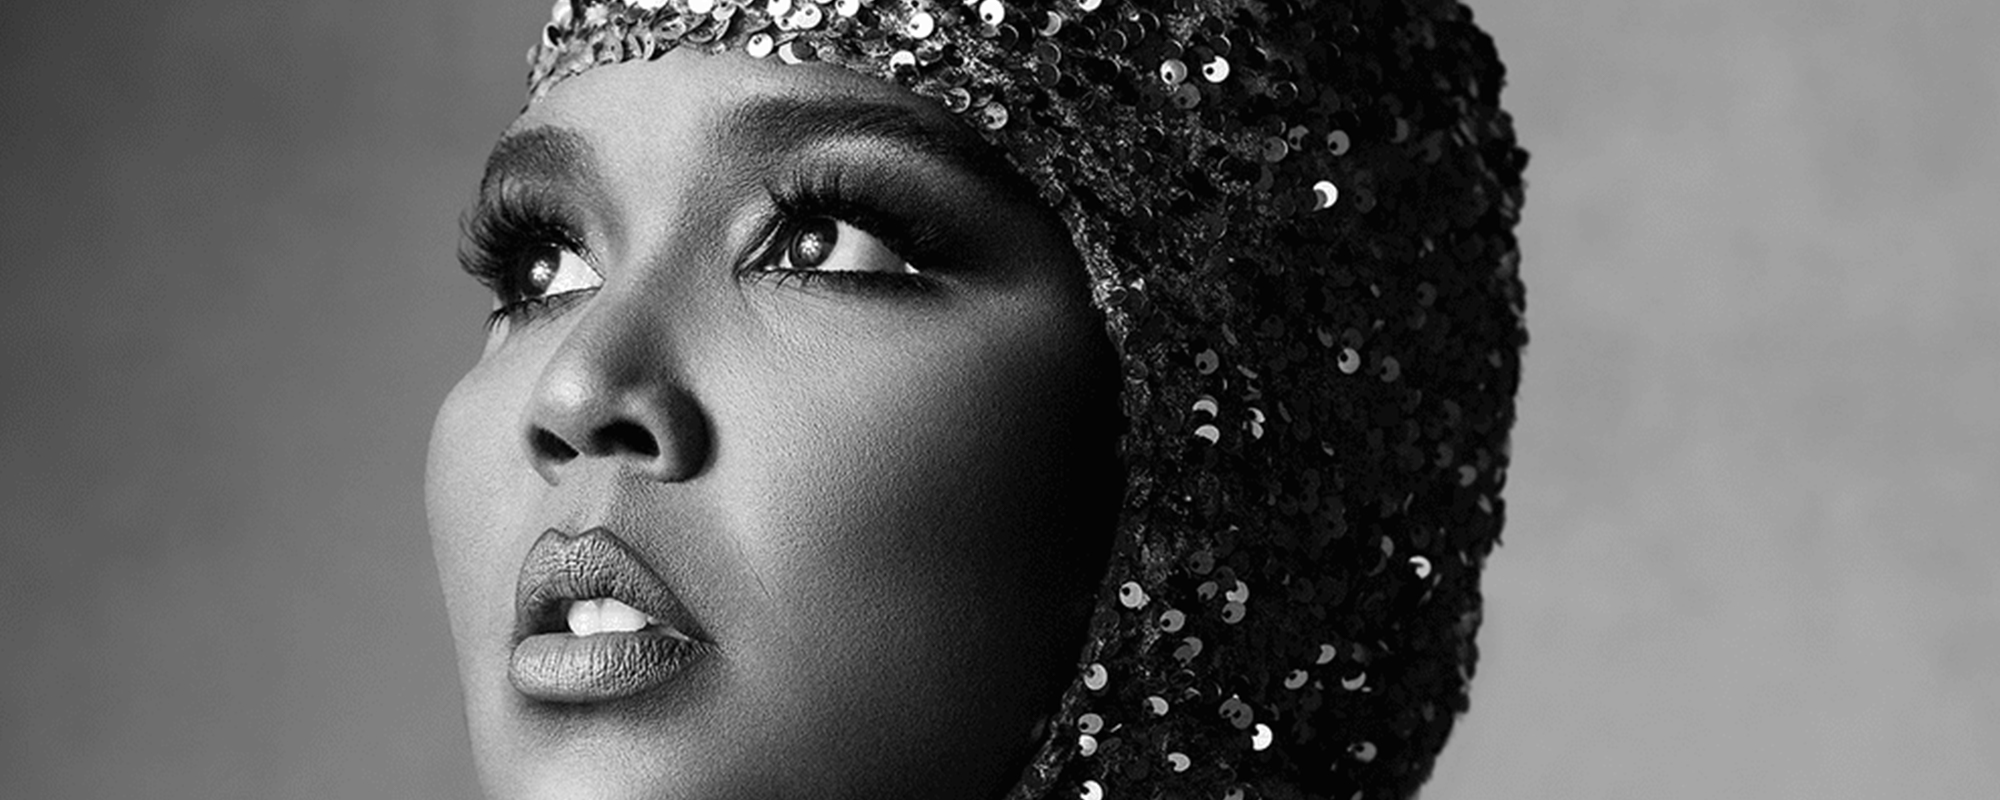 Lizzo Surprises Target Customers While Buying Her Own Album in the Store